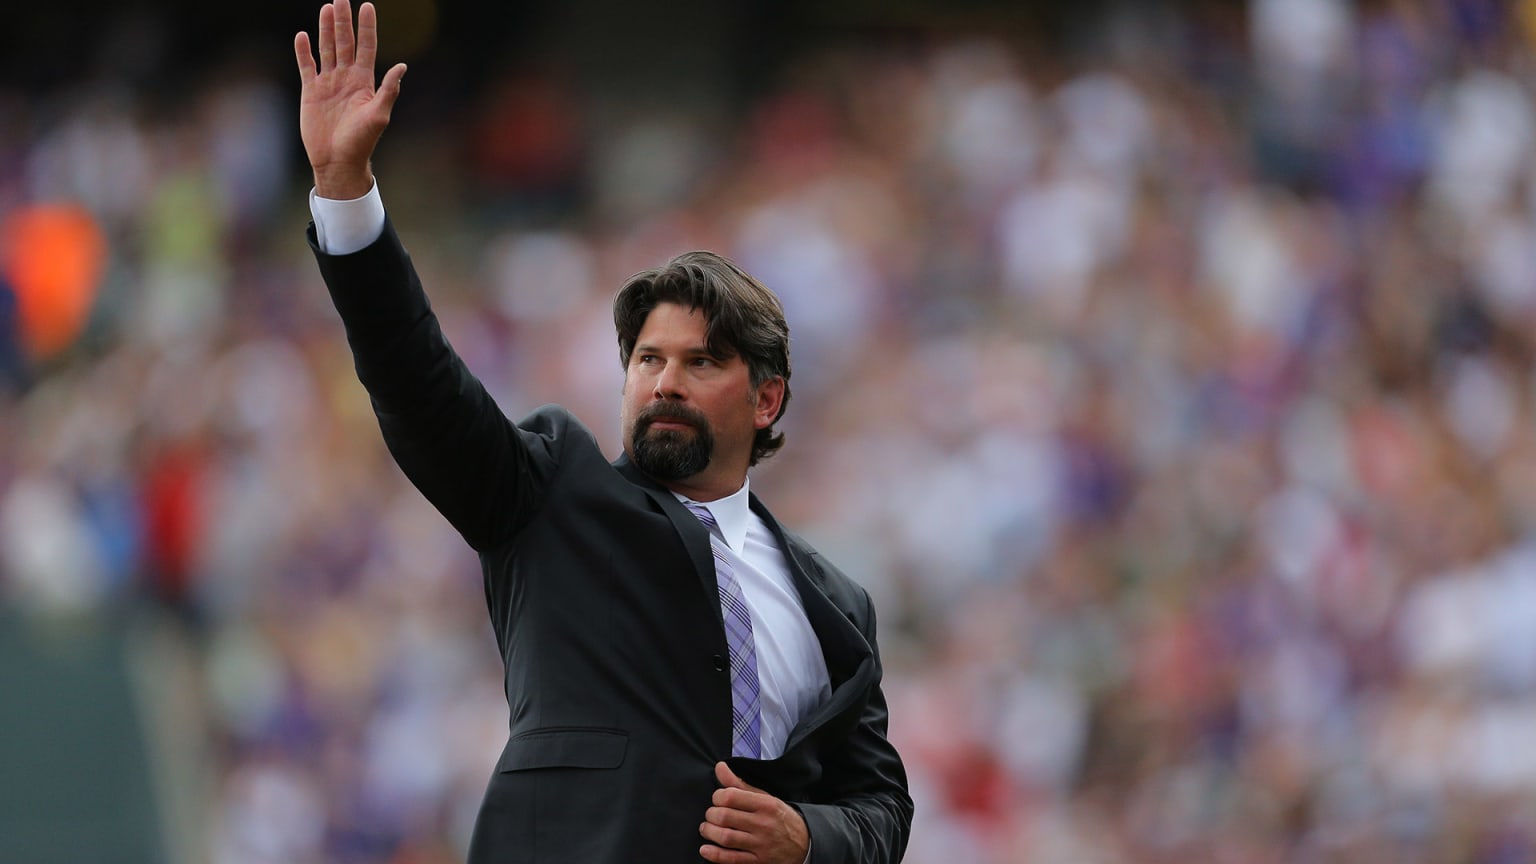 Todd Helton waves to the crowd